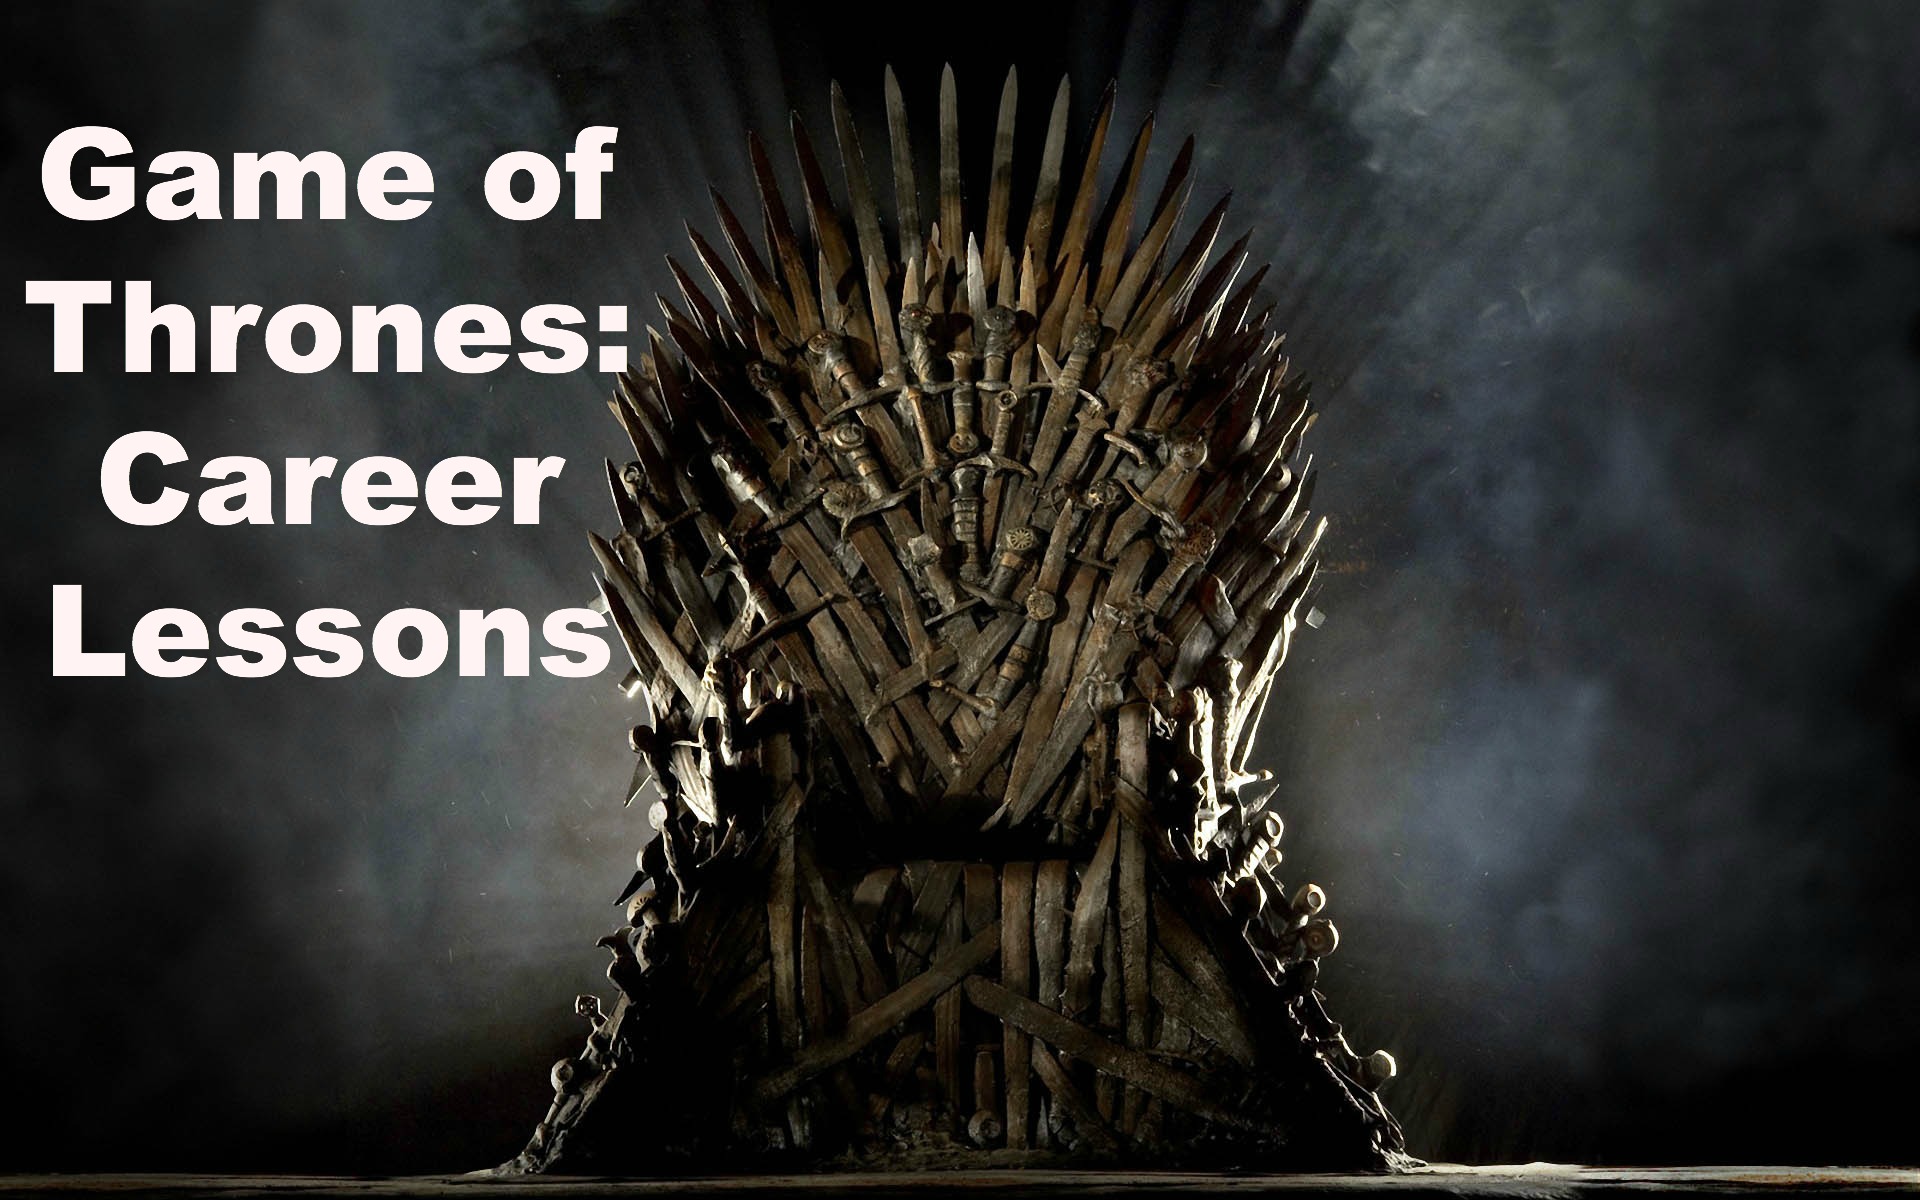 5 Hilarious Career Lessons from Game of Thrones